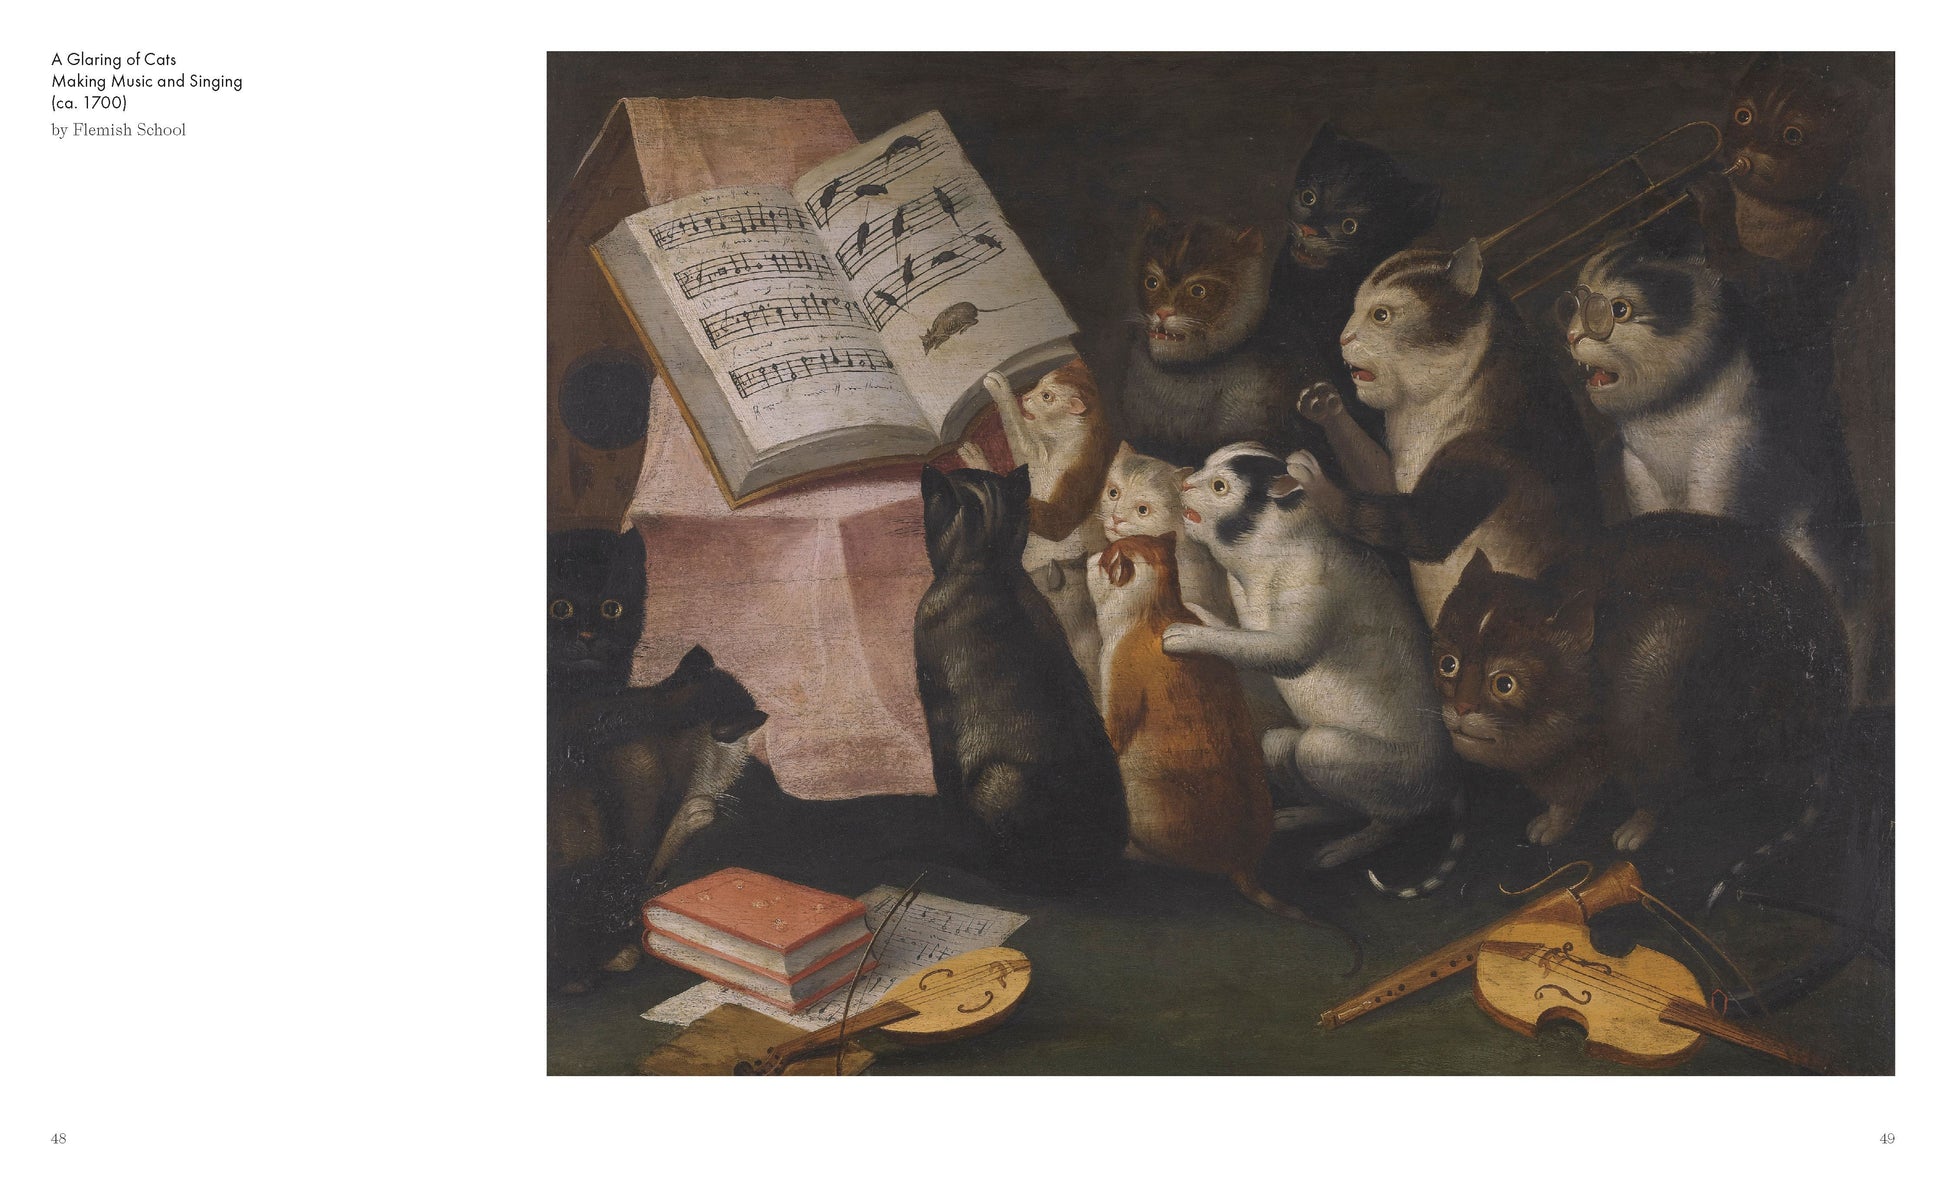 From the time of the pharaohs to world-famous internet sensations, cats have inspired artists to strive to capture their lithe movements and cryptic personalities for as long as they’ve been our furry companions. This joyous collection celebrates cats in art